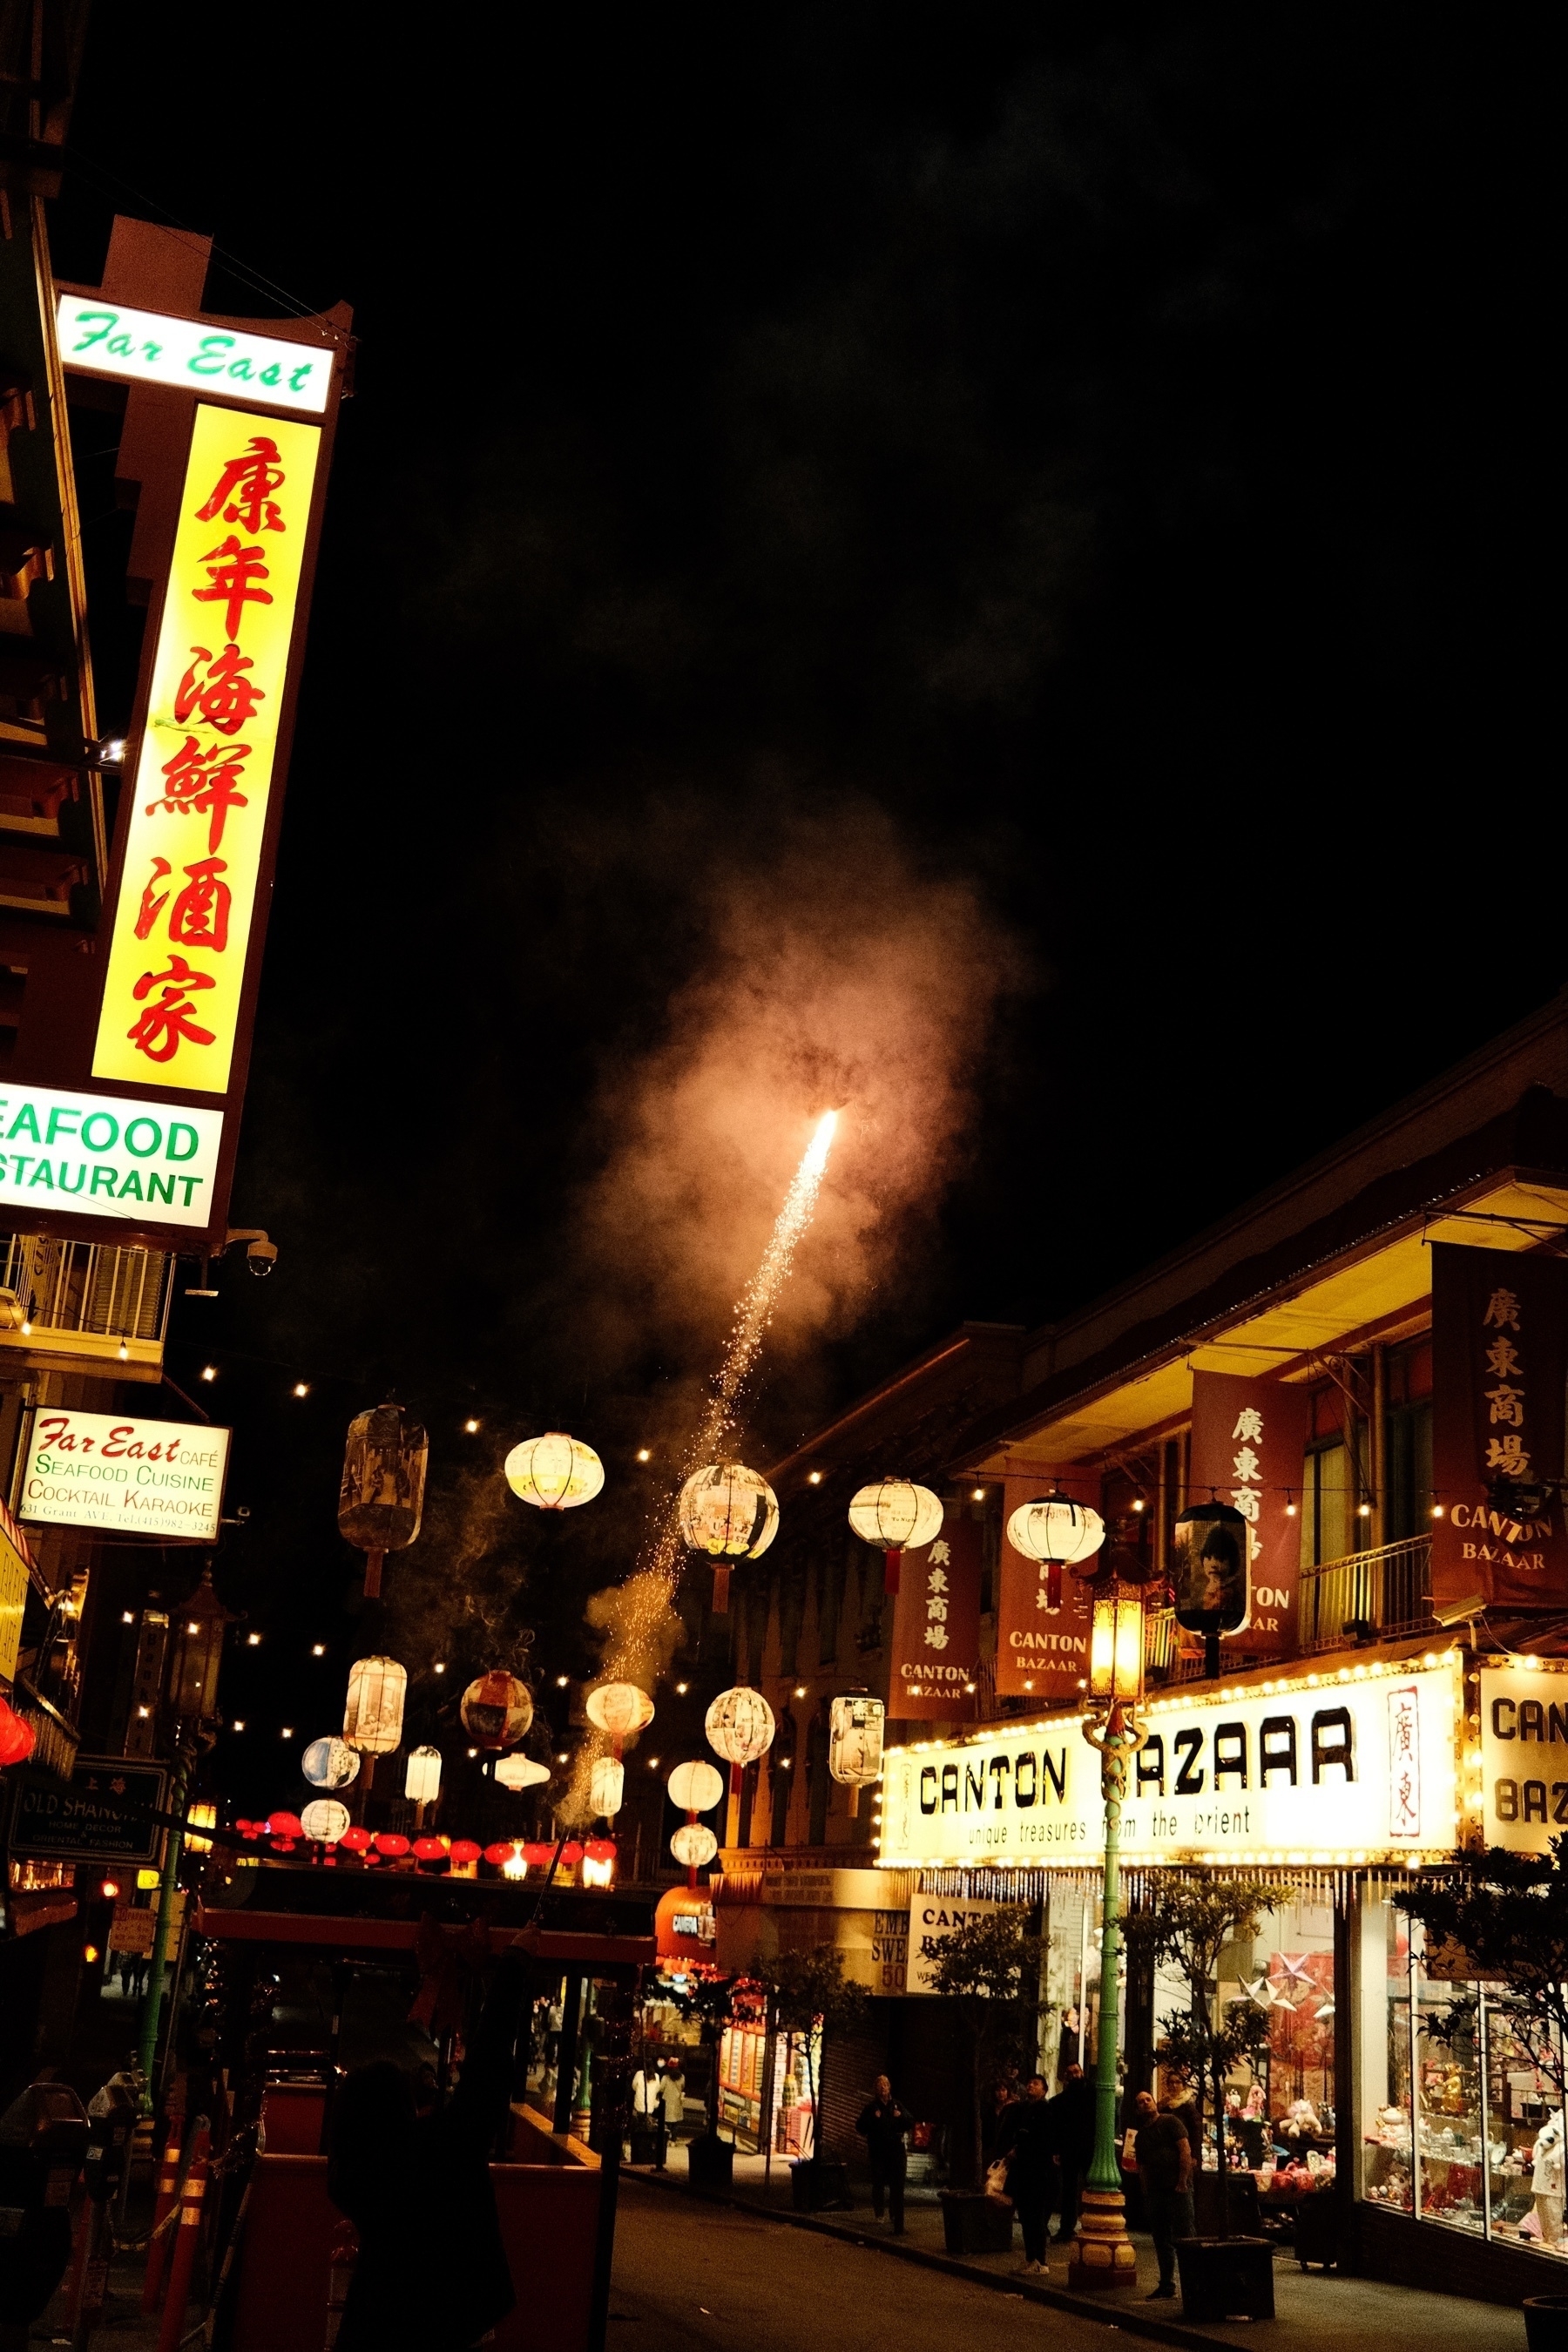 a sparkling bottle rocket shooting anive the dark street with red lanterns suspended above.